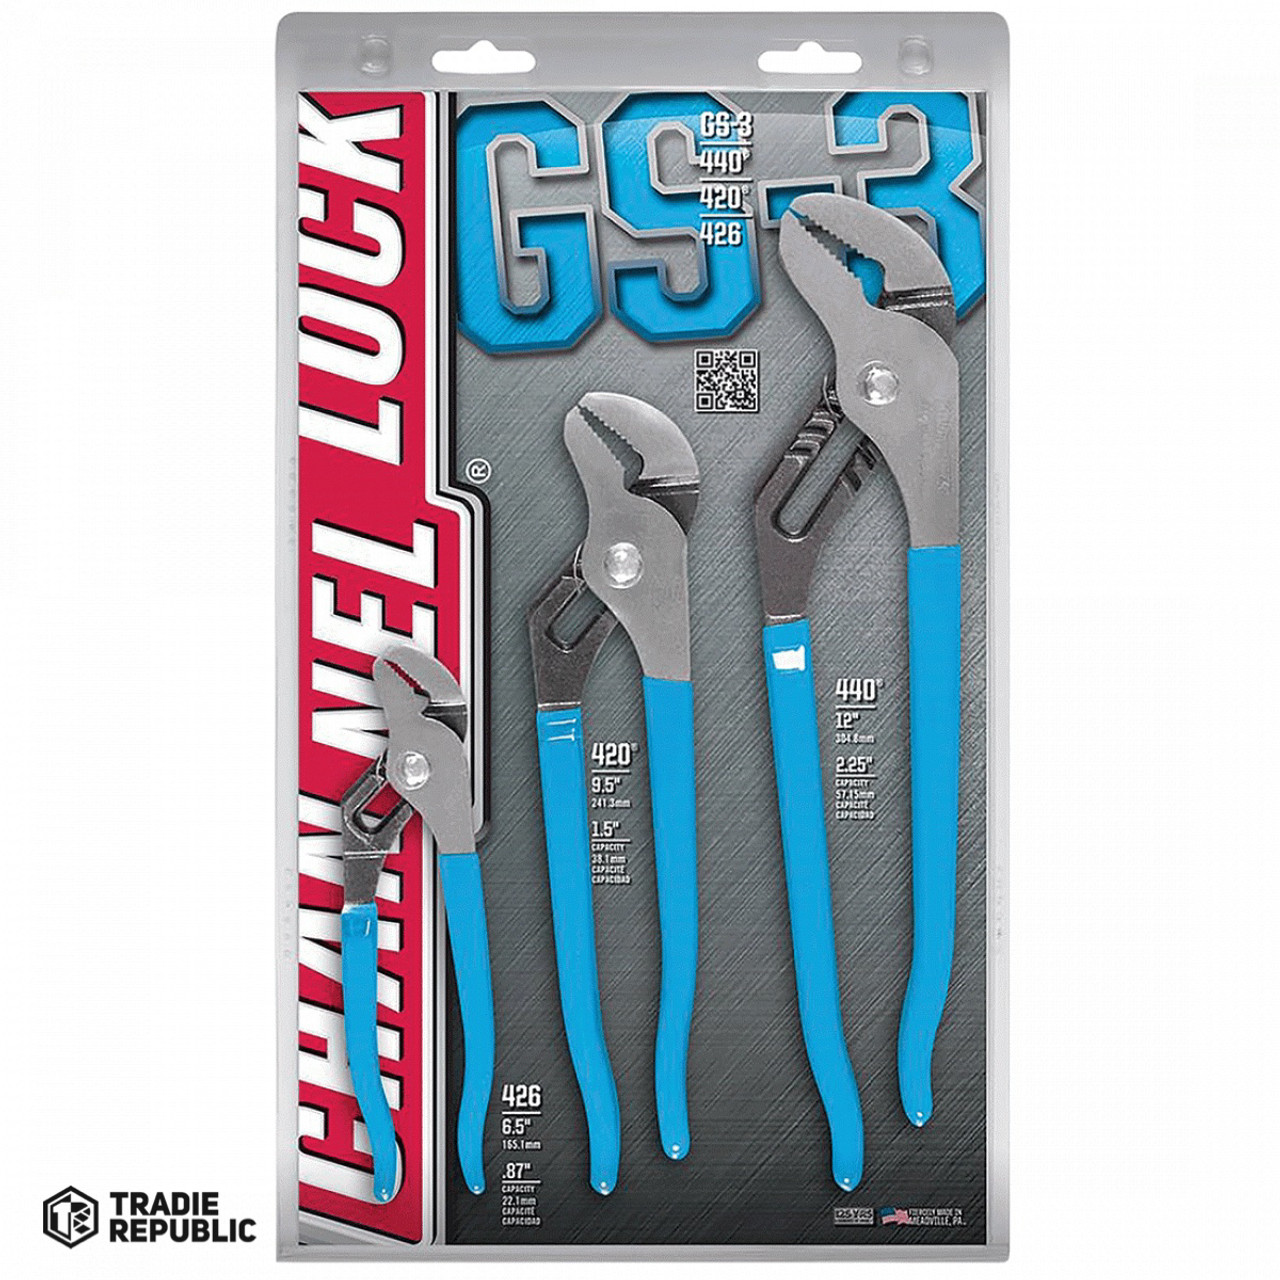 CHGS-3 Channellock Straight Jaw Tongue and Groove Plier Set - 3Pc